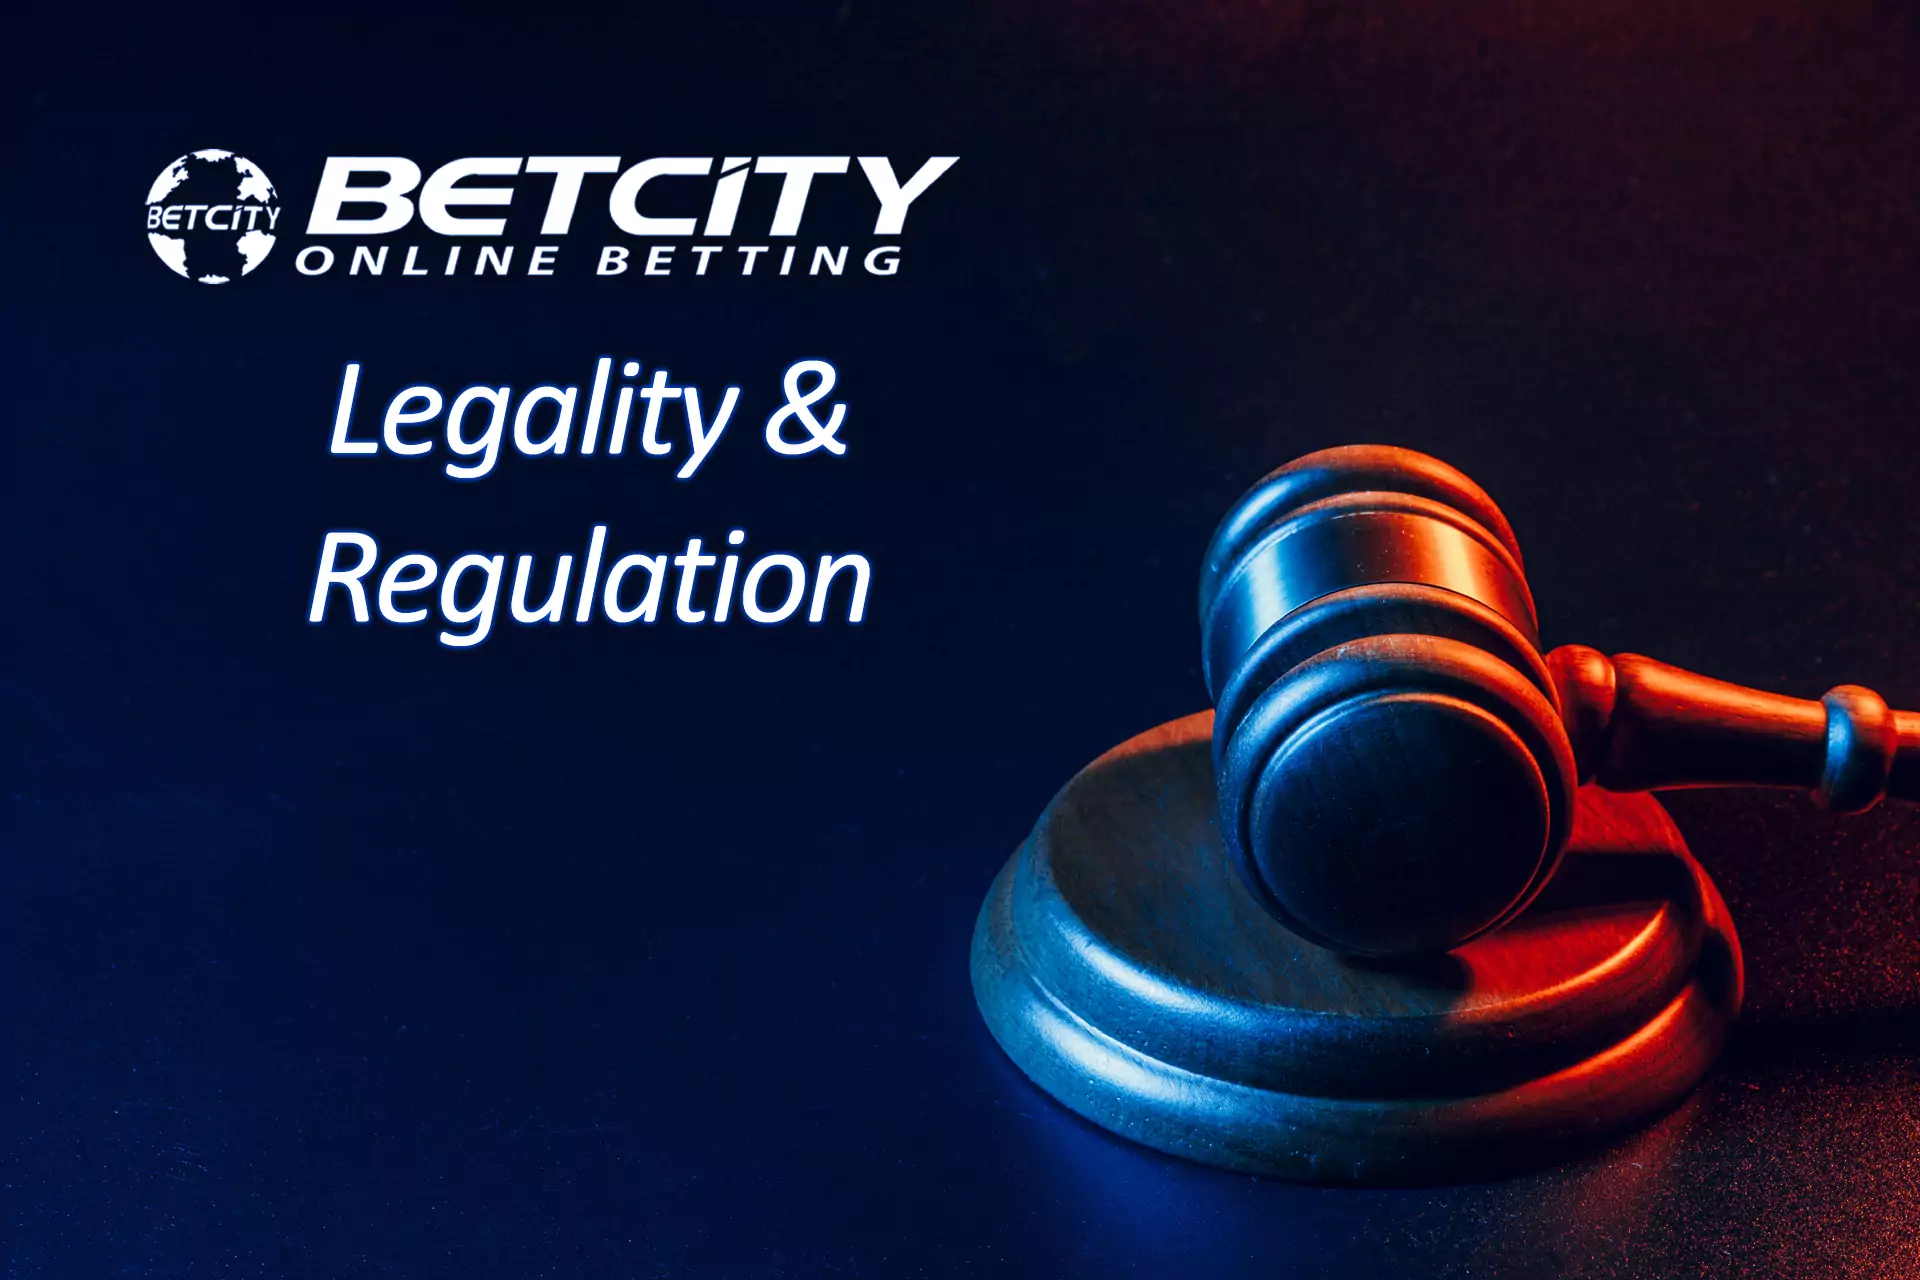 The Betcity site works legally using the local license.